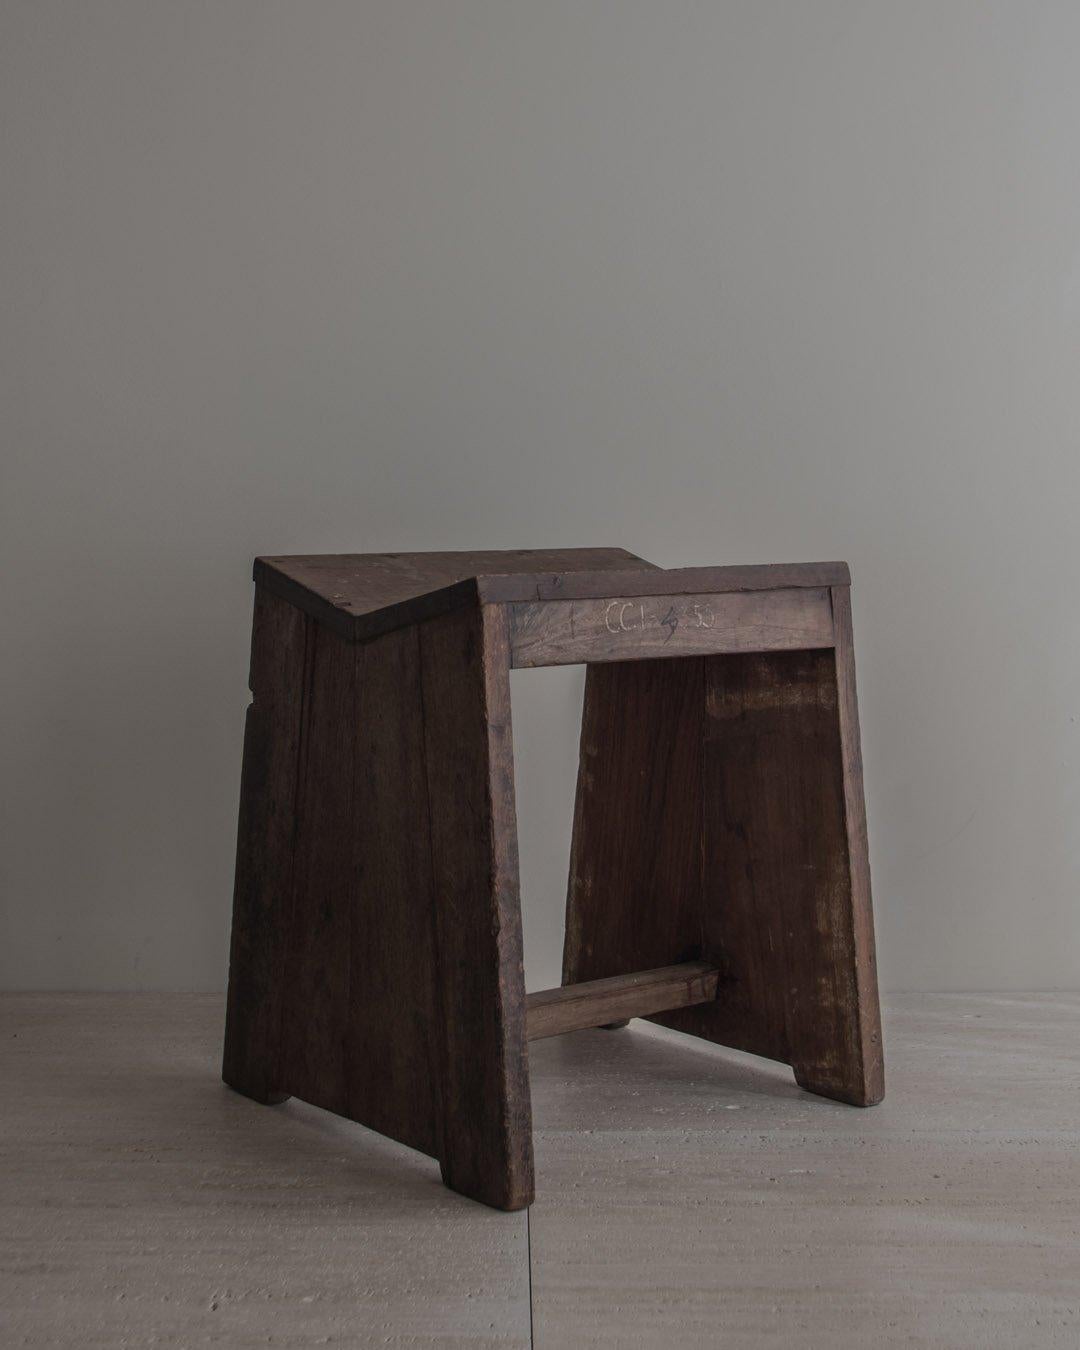 Authentic PJ-SI-68-A also known as the Sewing Stool by Pierre Jeanneret - From the furnishings of the buildings of Chandigarh, circa the 1960s. Photos of the current and original state - Comes with authenticity certificate – The item has writings on